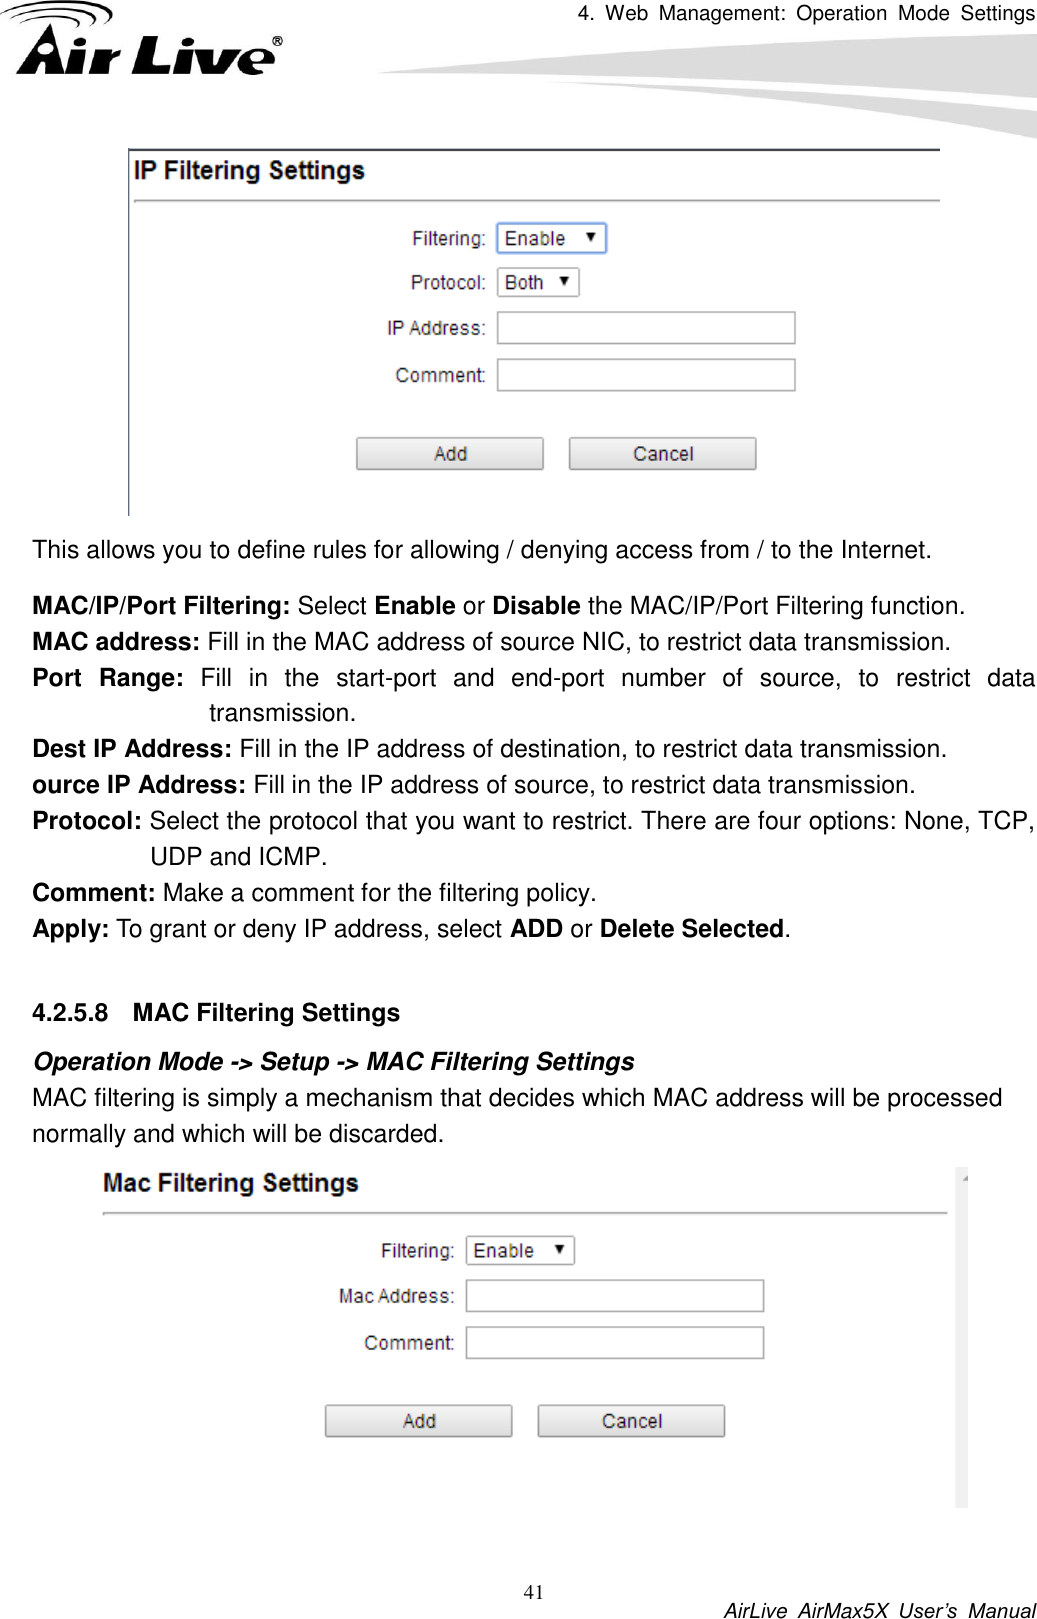 4.  Web  Management:  Operation  Mode  Settings           AirLive  AirMax5X  User’s  Manual 41  This allows you to define rules for allowing / denying access from / to the Internet. MAC/IP/Port Filtering: Select Enable or Disable the MAC/IP/Port Filtering function. MAC address: Fill in the MAC address of source NIC, to restrict data transmission. Port  Range:  Fill  in  the  start-port  and  end-port  number  of  source,  to  restrict  data transmission. Dest IP Address: Fill in the IP address of destination, to restrict data transmission. ource IP Address: Fill in the IP address of source, to restrict data transmission. Protocol: Select the protocol that you want to restrict. There are four options: None, TCP, UDP and ICMP. Comment: Make a comment for the filtering policy. Apply: To grant or deny IP address, select ADD or Delete Selected.  4.2.5.8  MAC Filtering Settings Operation Mode -&gt; Setup -&gt; MAC Filtering Settings MAC filtering is simply a mechanism that decides which MAC address will be processed normally and which will be discarded.     